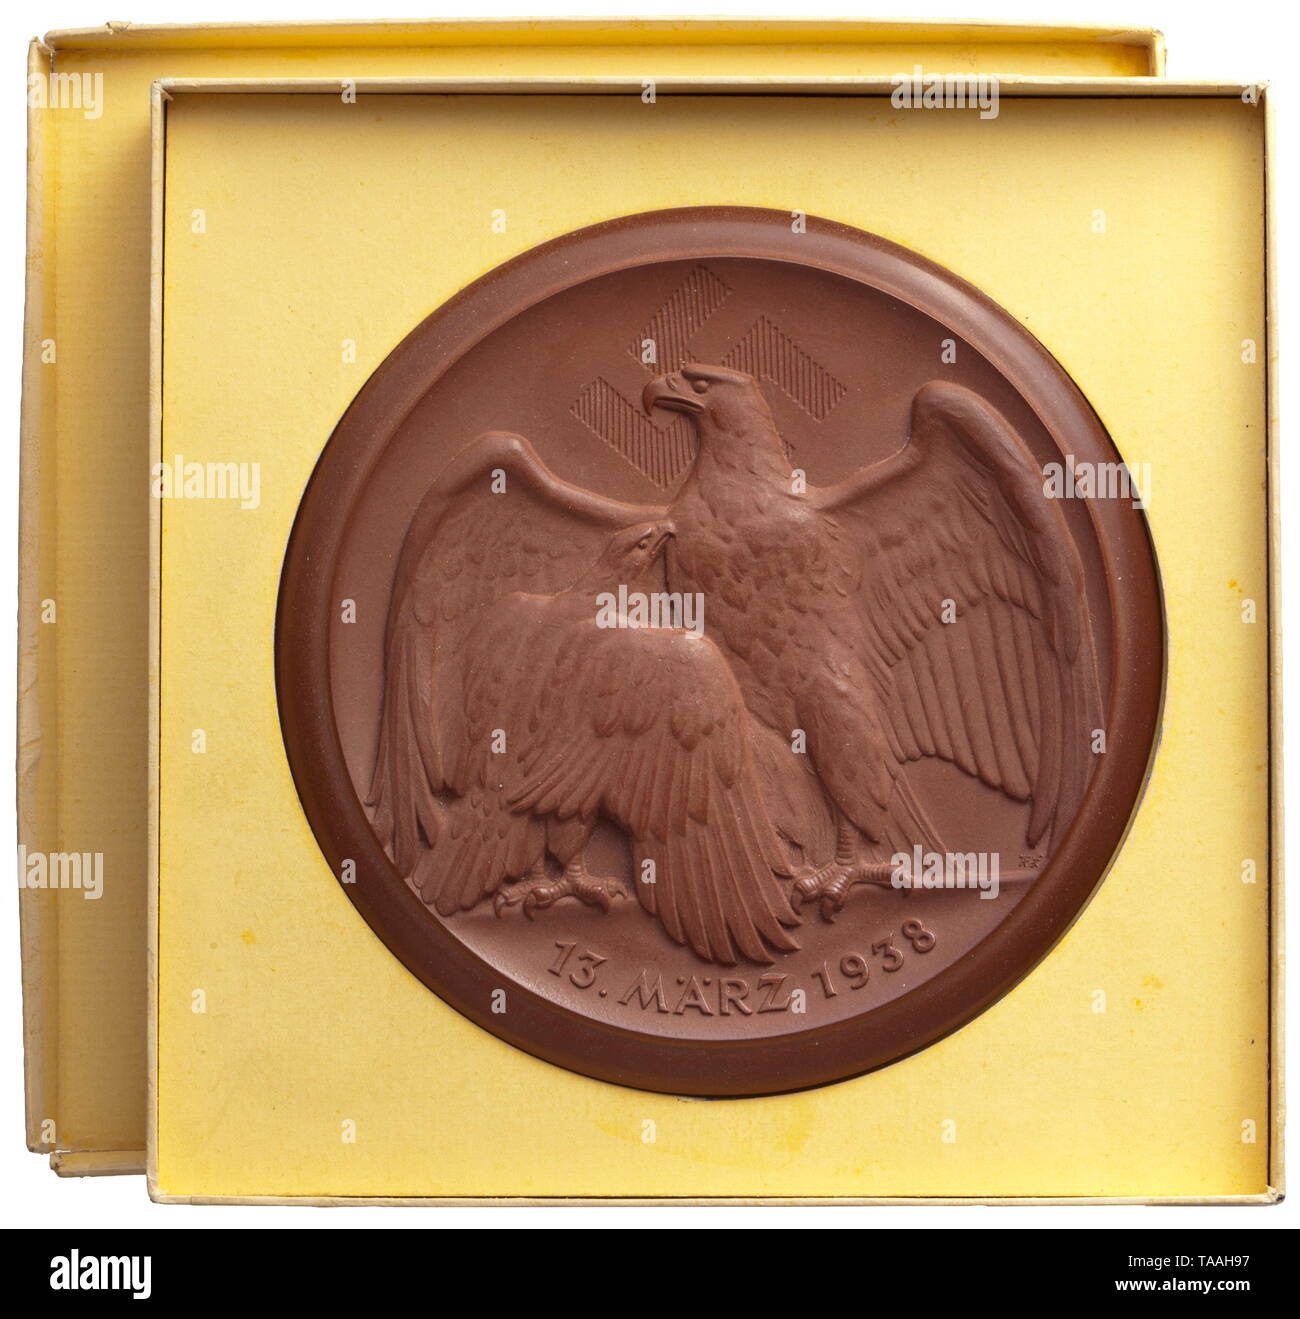 Gauleiter Martin Mutschmann - a plaque in its case Böttger stoneware from the Meissen Porcelain Manufactory. National eagle with swastika, date (tr.) '13 March 1938' (Annexation of Austria) on the obverse. On the reverse NS motto and dedication in gold 'Für treue Pflichterfüllung als Ortsgruppenleiter in Leipzig Gautag 1938' (tr. 'For loyal duty as Local Group Leader in Leipzig Gautag 1938'), swastika and Meissen mark of crossed swords. Diameter 12 cm. In the original cardboard case, slightly knocked, one corner torn. Very rare. Mutschmann, Gauleiter of Saxony, was executed, Editorial-Use-Only Stock Photo